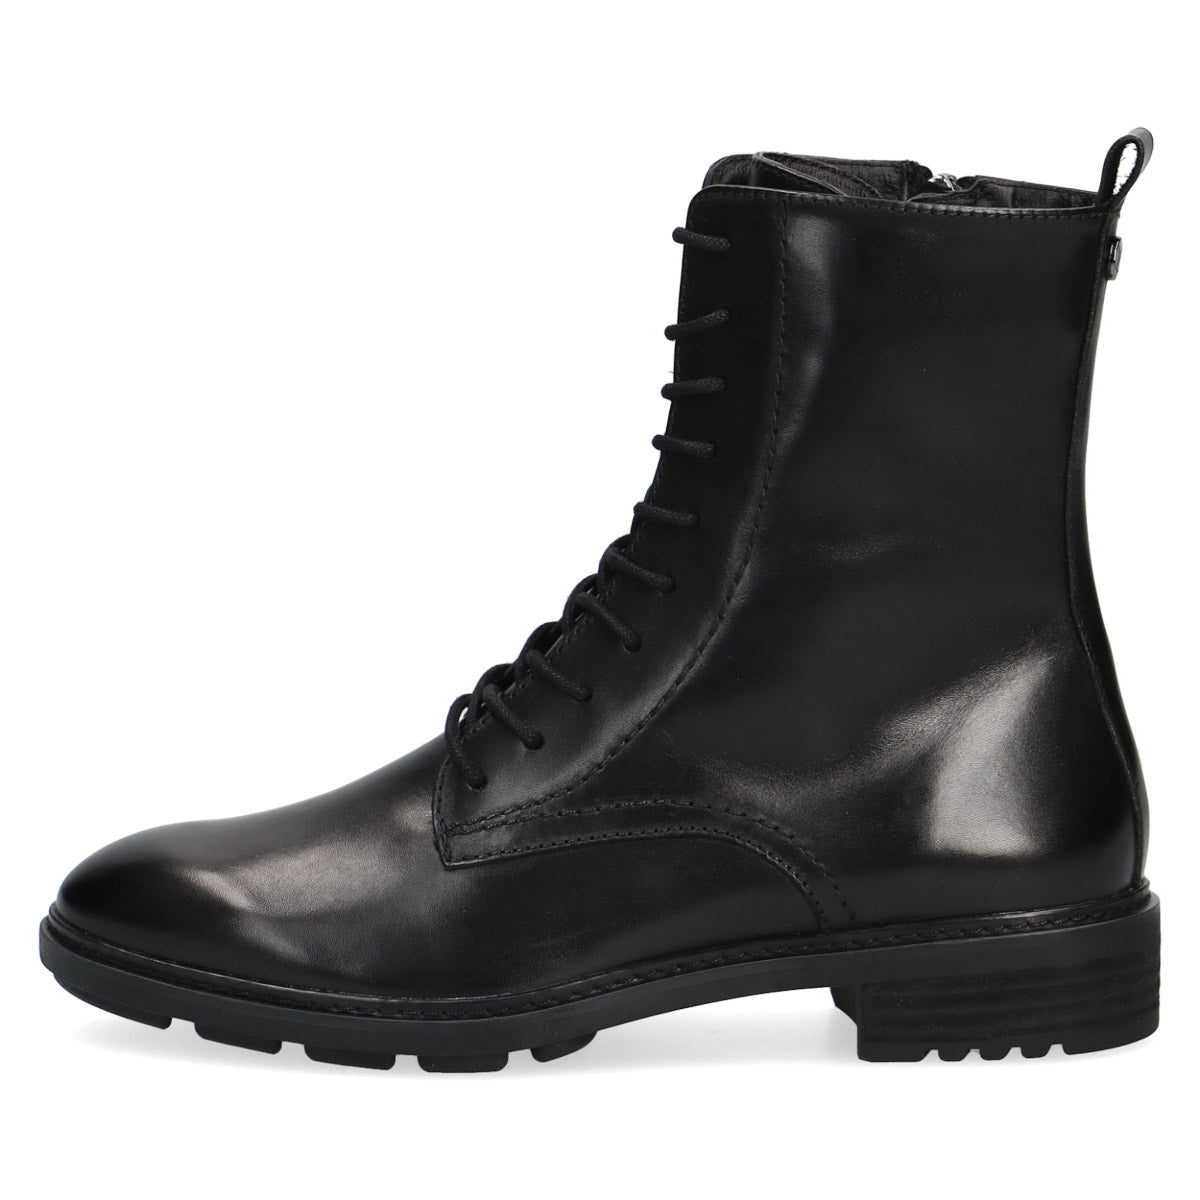 Front view of Caprice Black Leather Boots highlighting the outer zipper.